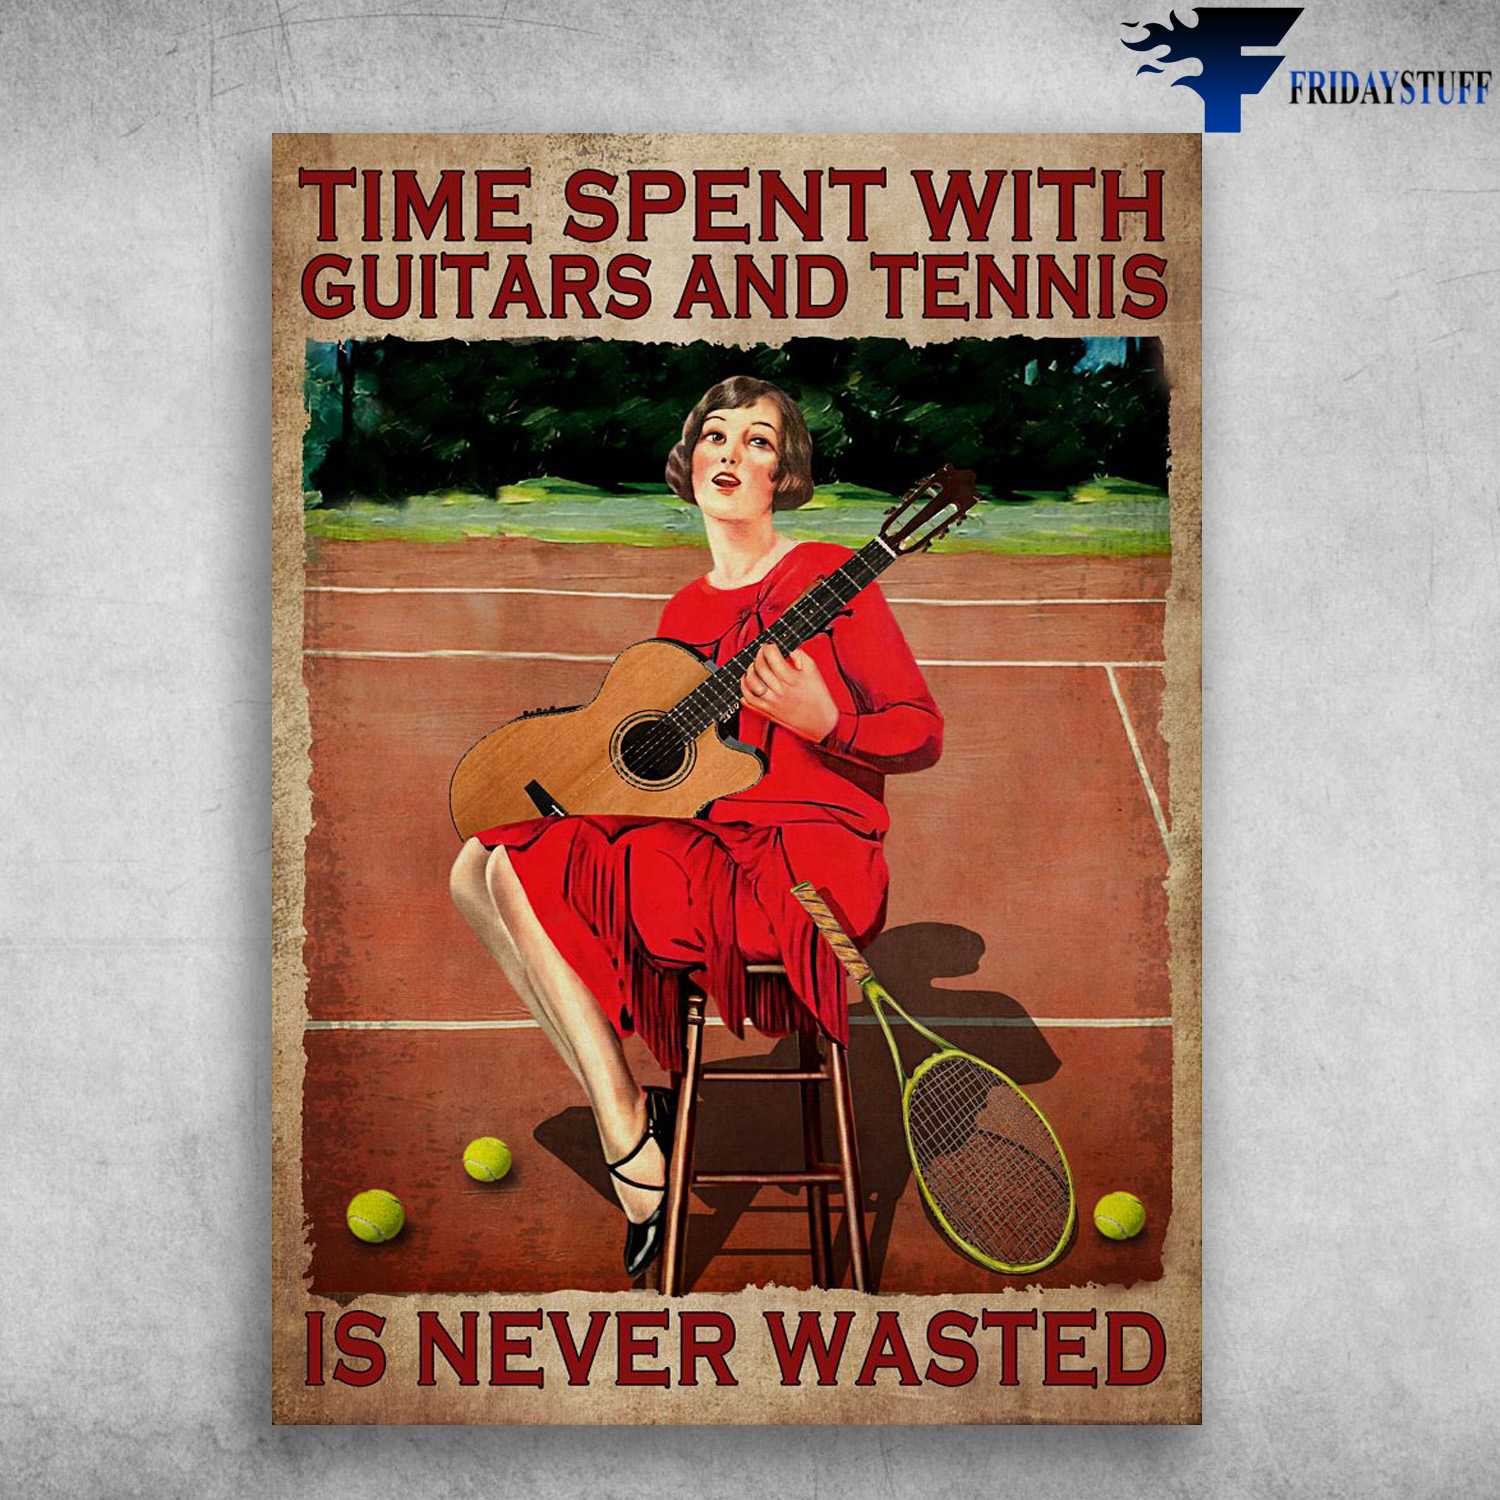 Lady Guitar And Tennis - Time Spent With Guitars And Tennis, Is Never Wasted